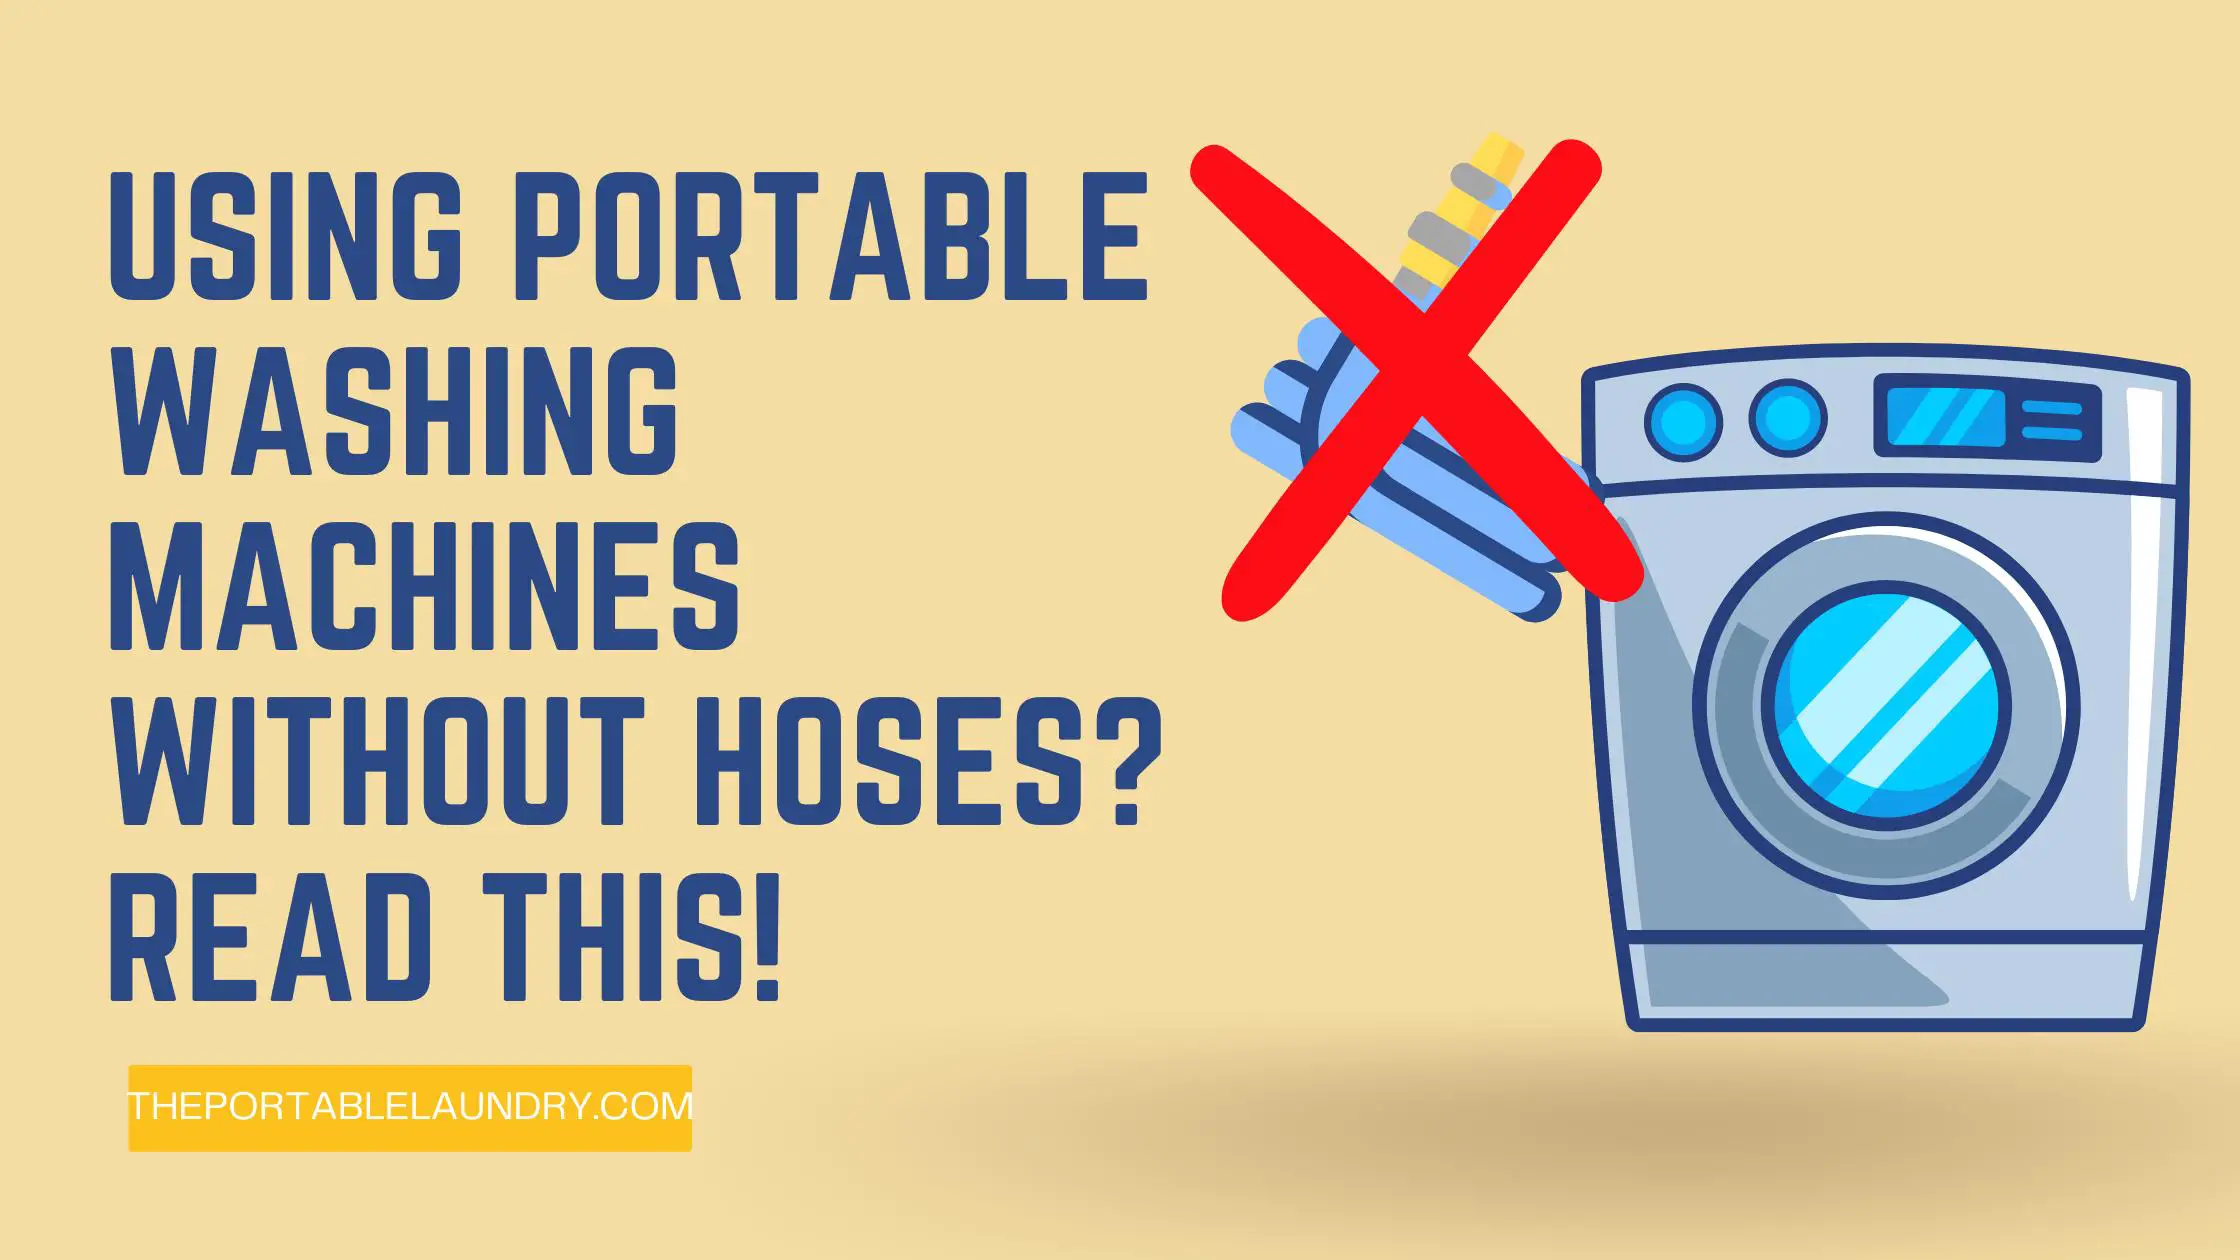 Using Portable Washing Machines Without Hoses Read this!